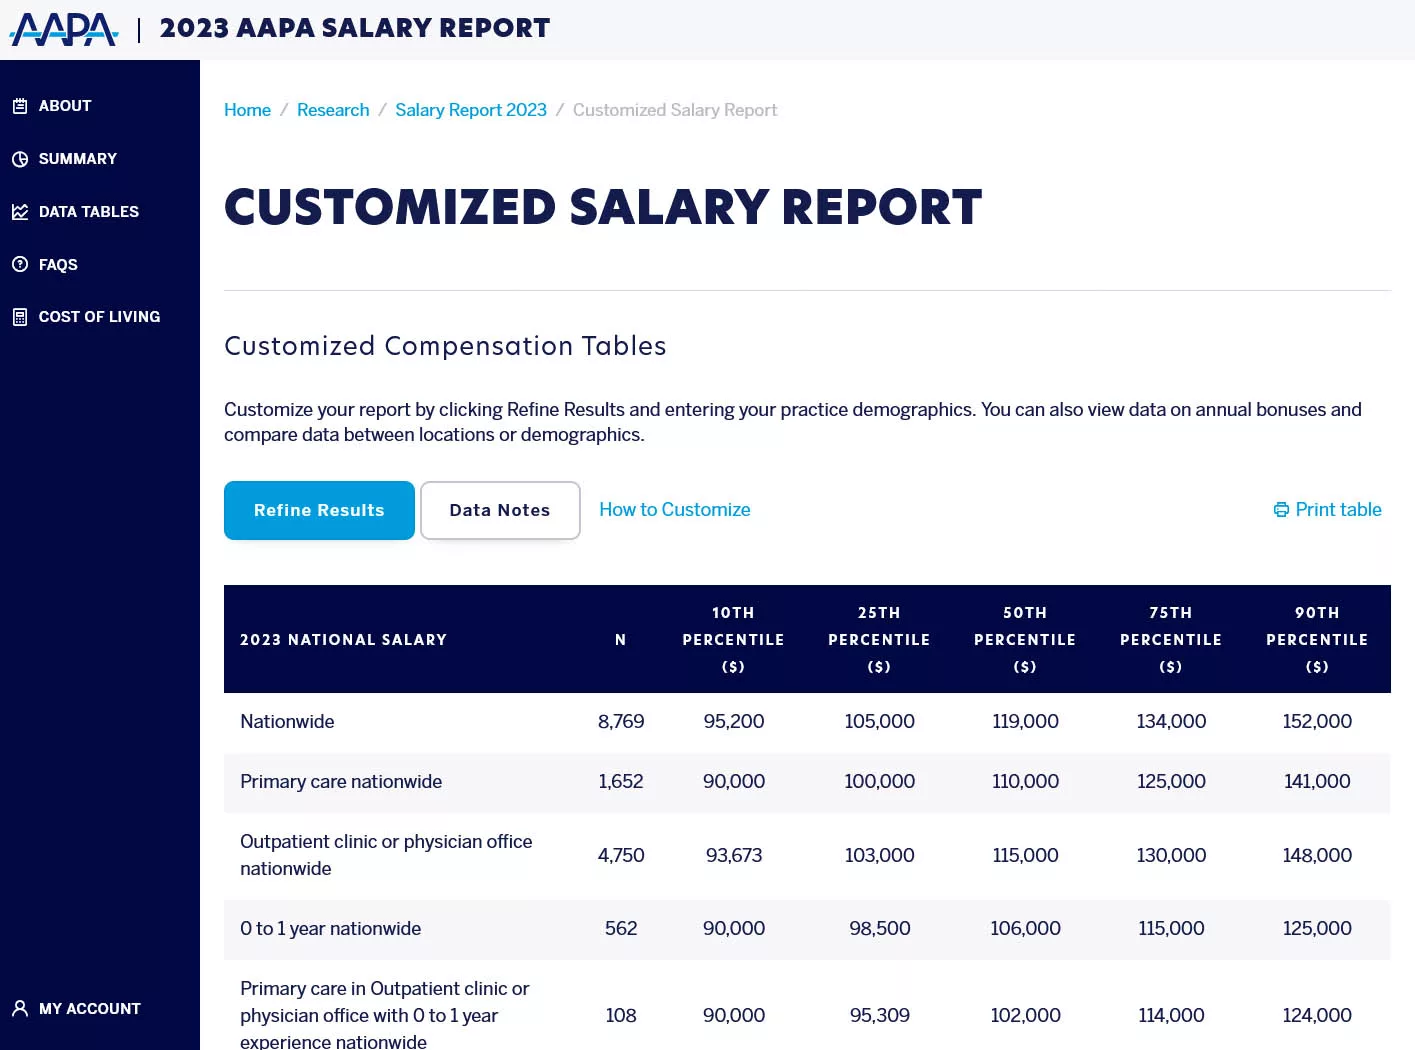 Negotiate Your Salary With the 2023 AAPA Salary Report - AAPA